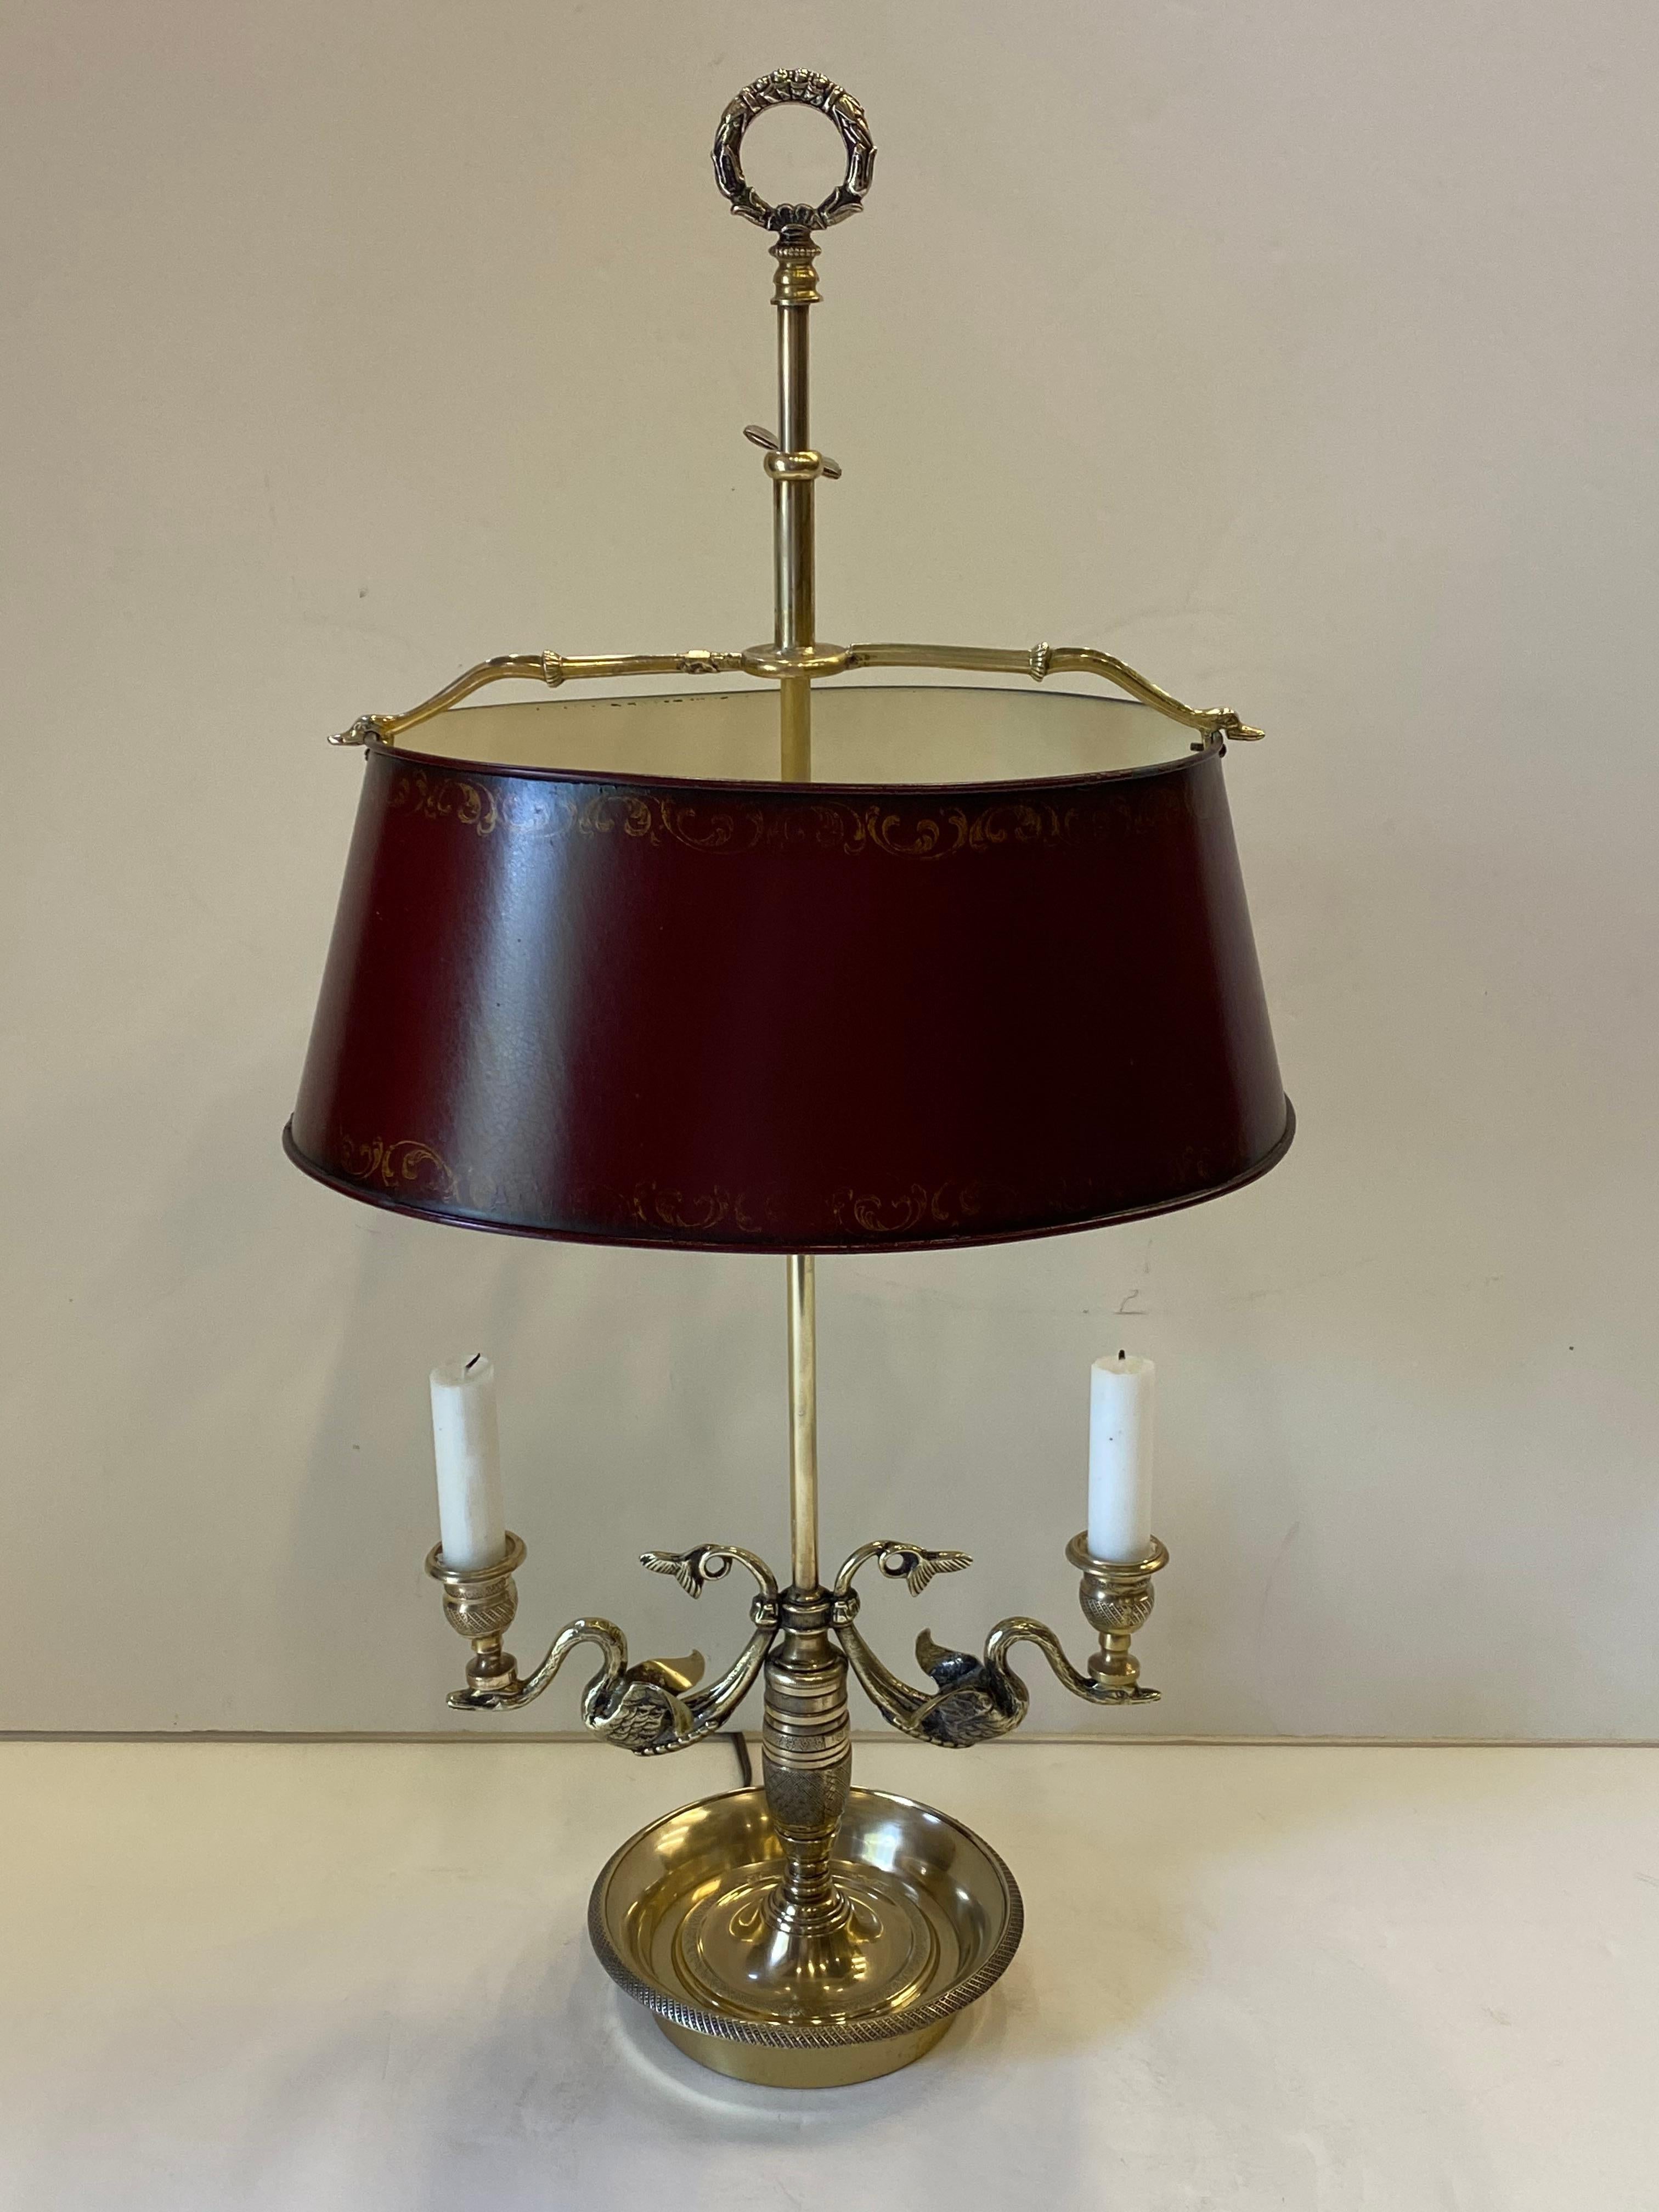 Classy Vintage French Cast Brass Bouillette Lamp with Swans 1